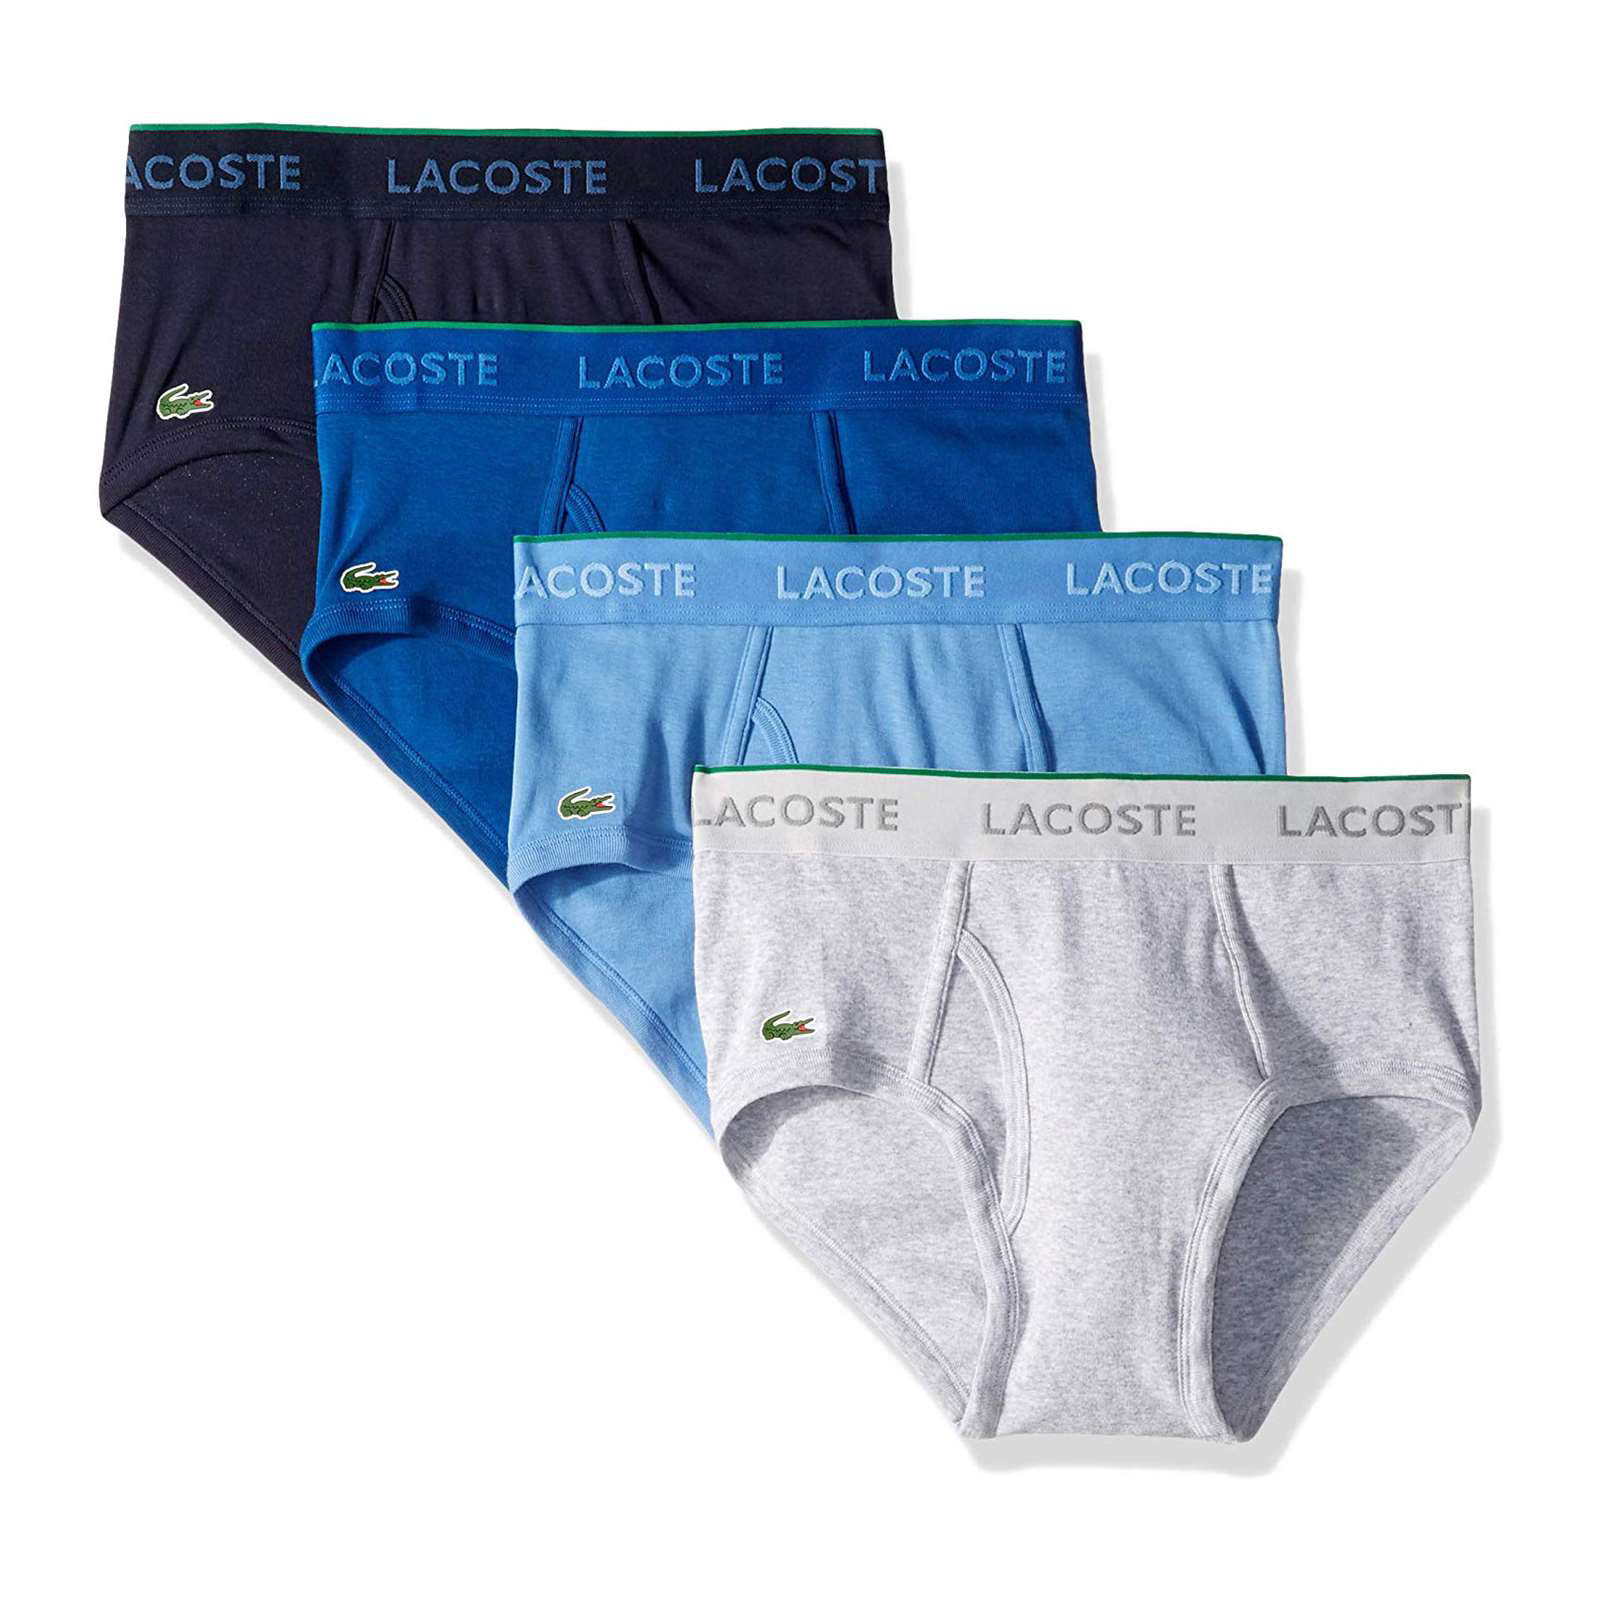 Lacoste Mens Pants pack of 4 